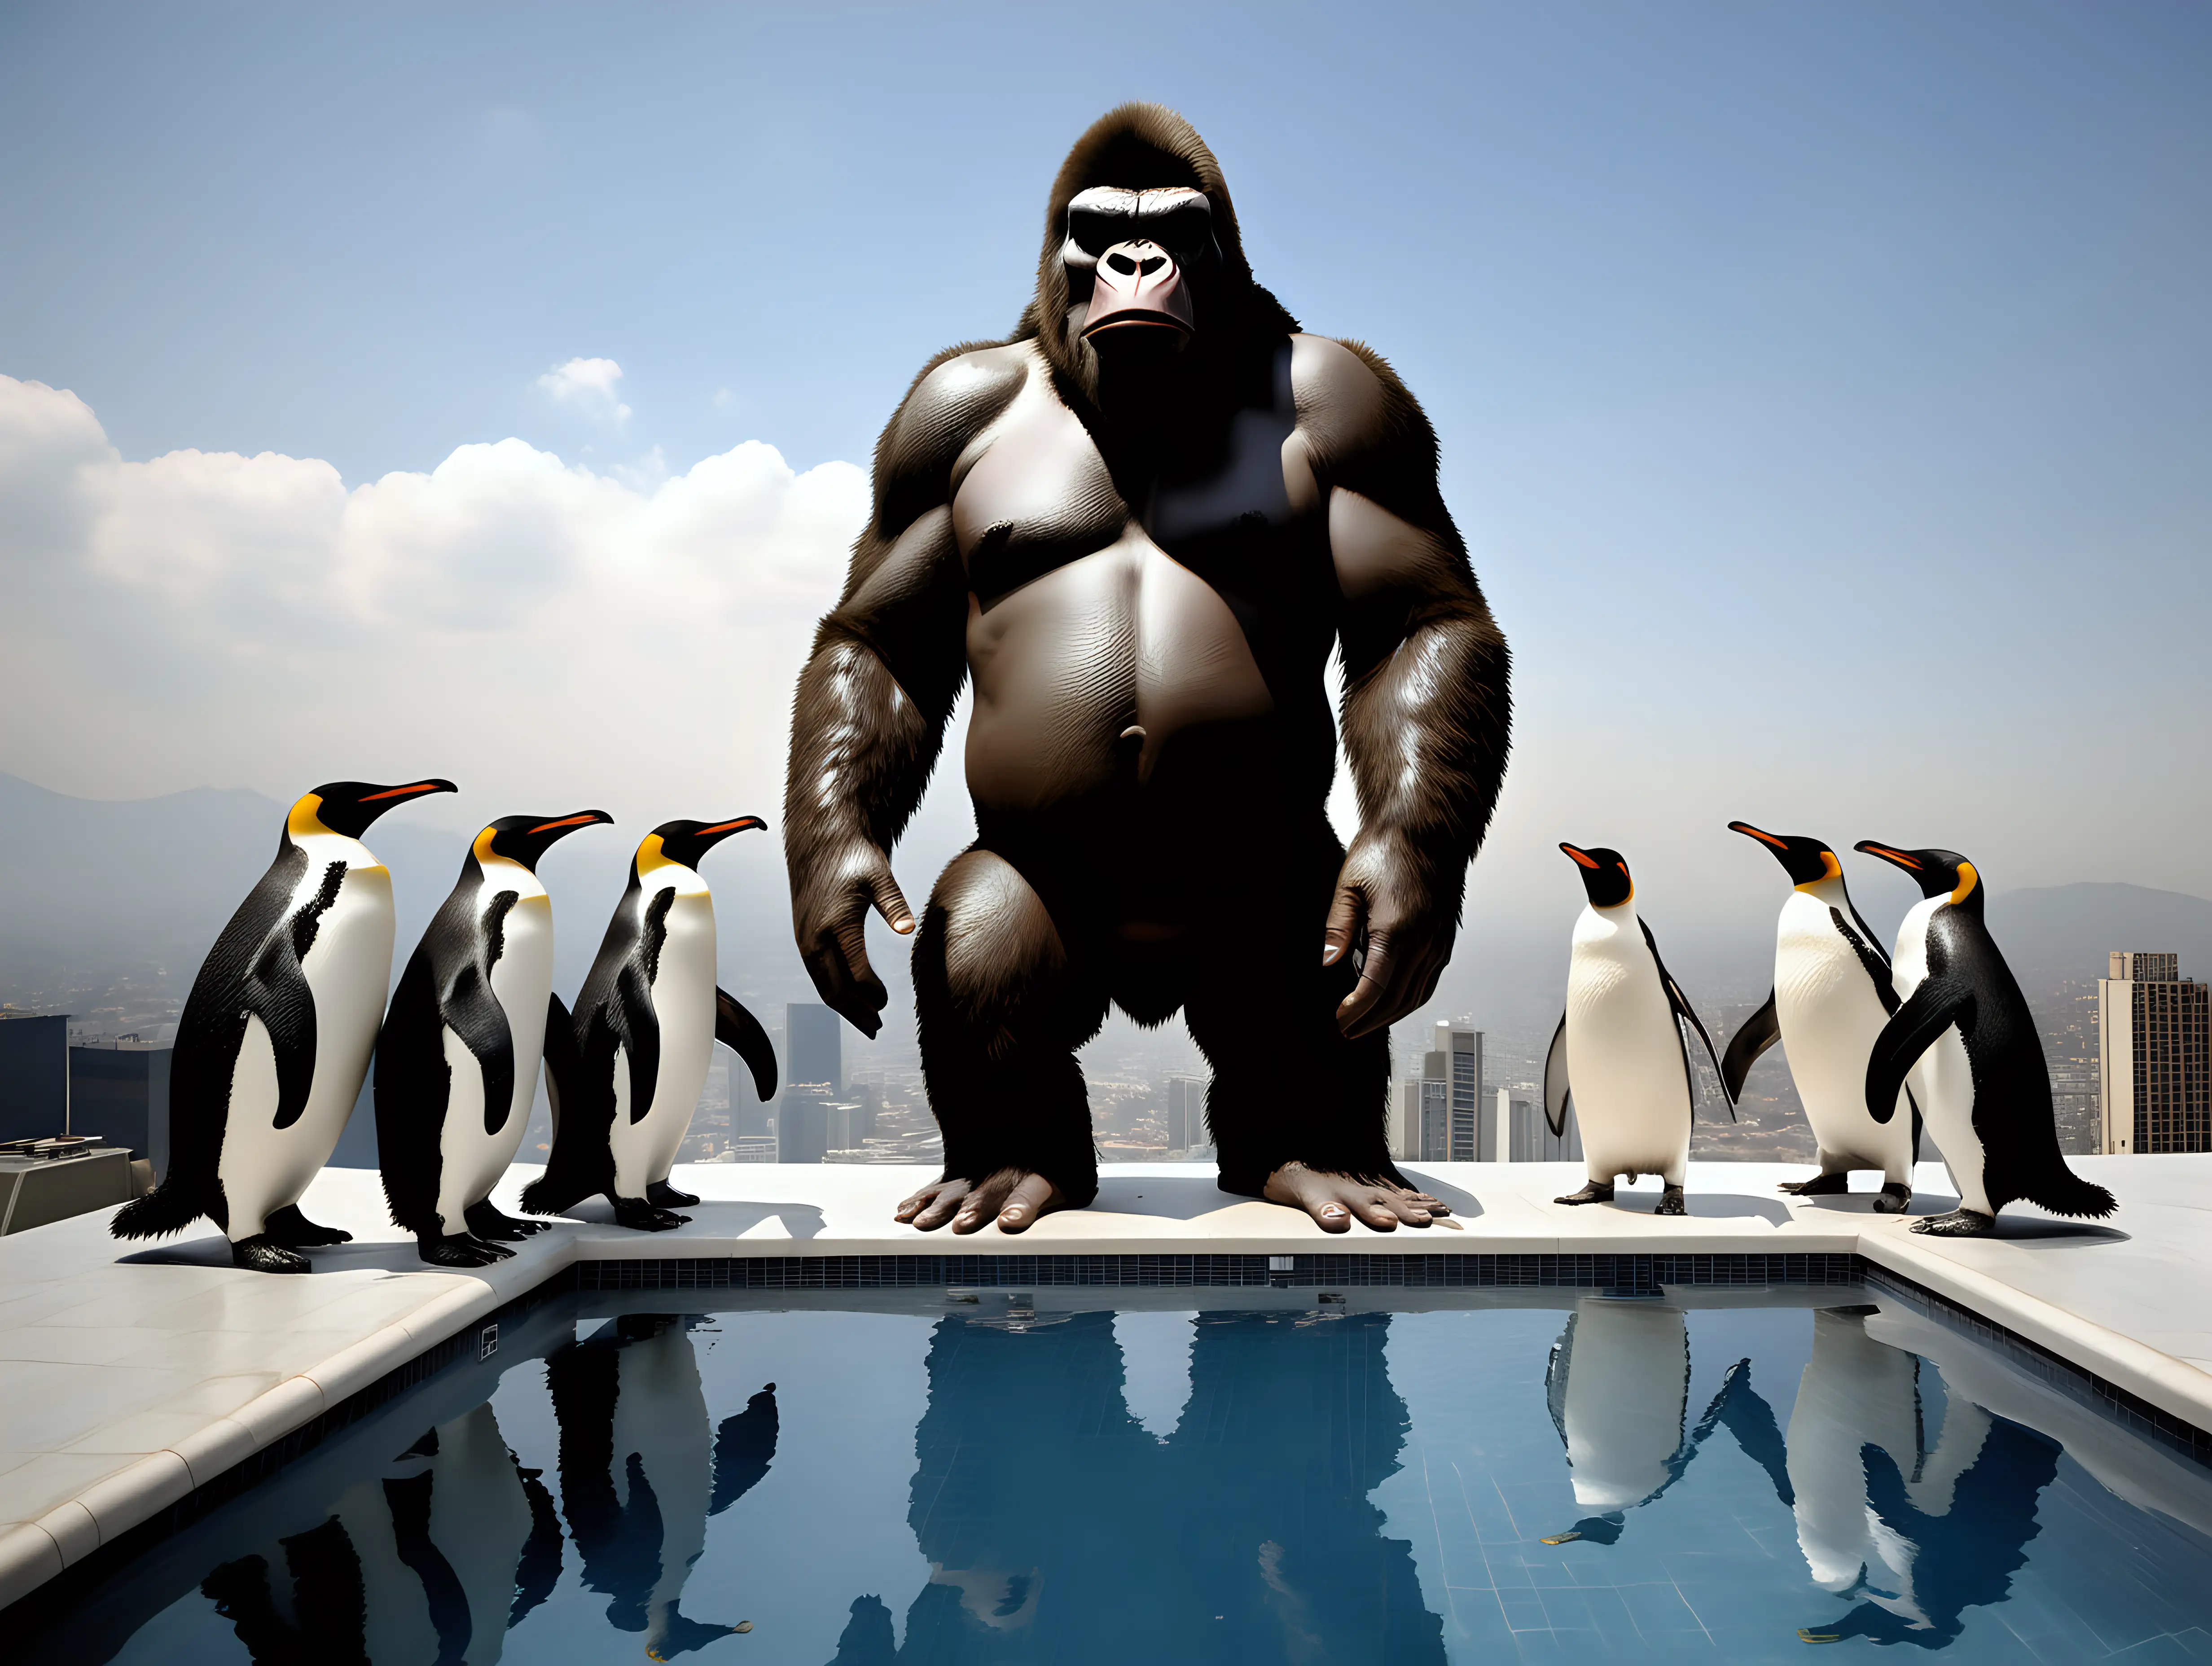 King Kong surrounded by penguins in a swimming pool on top of a hotel in Mexico City